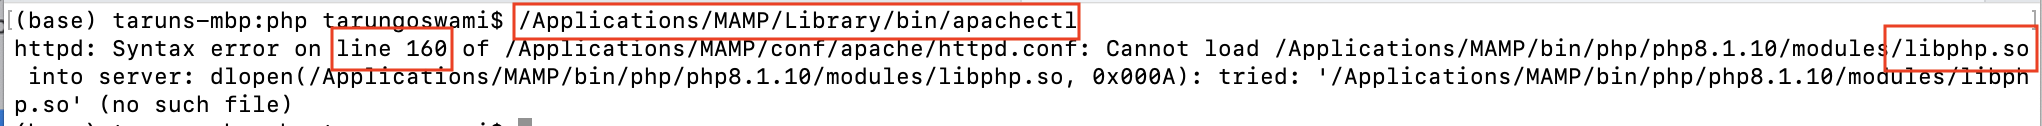 apache can not load libphp.so